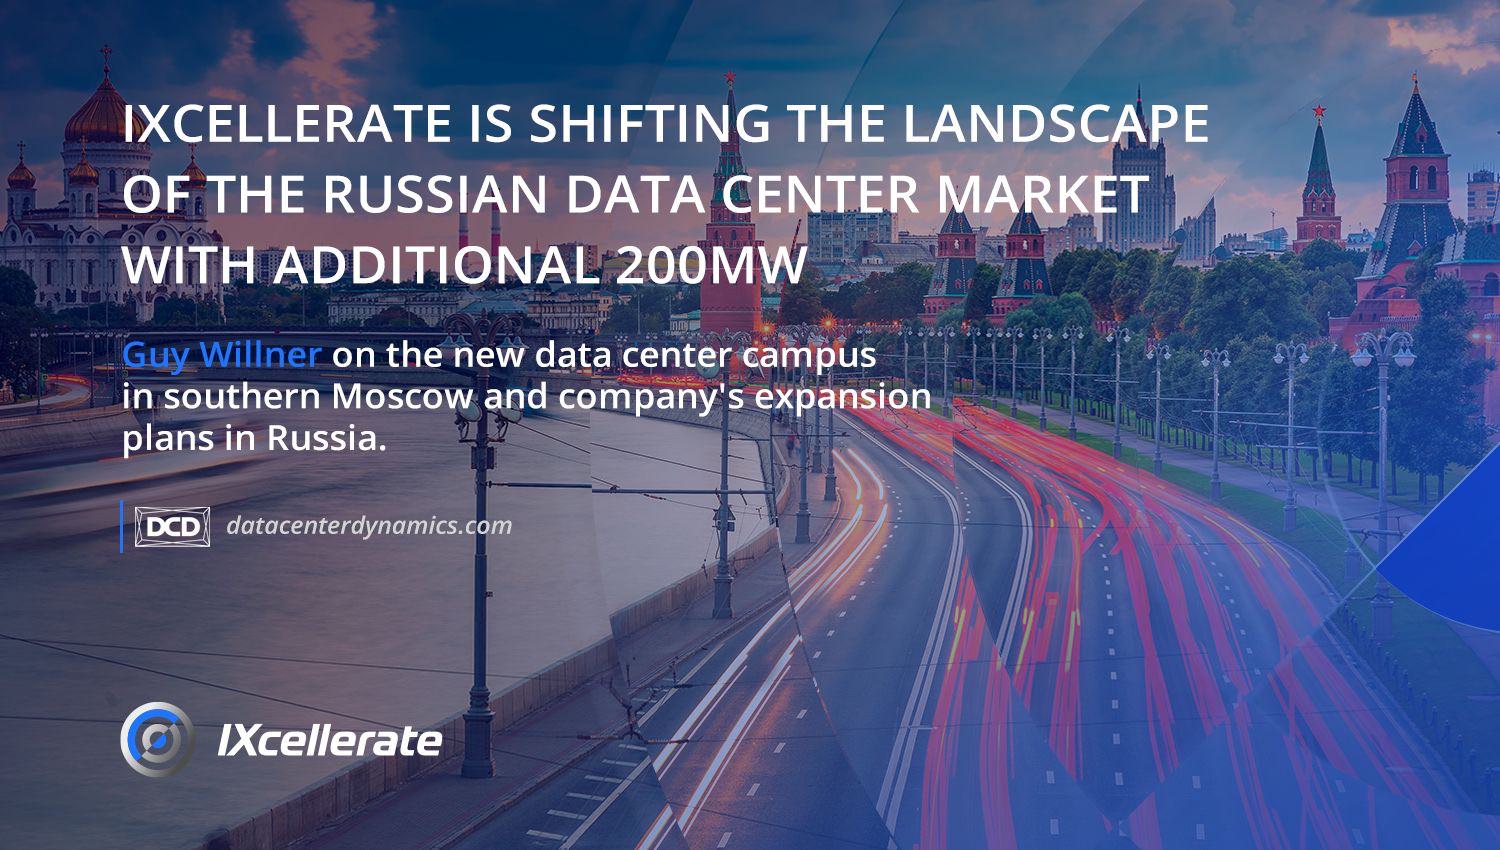 IXcellerate is shifting the landscape of the Russian data center market with additional 200MW